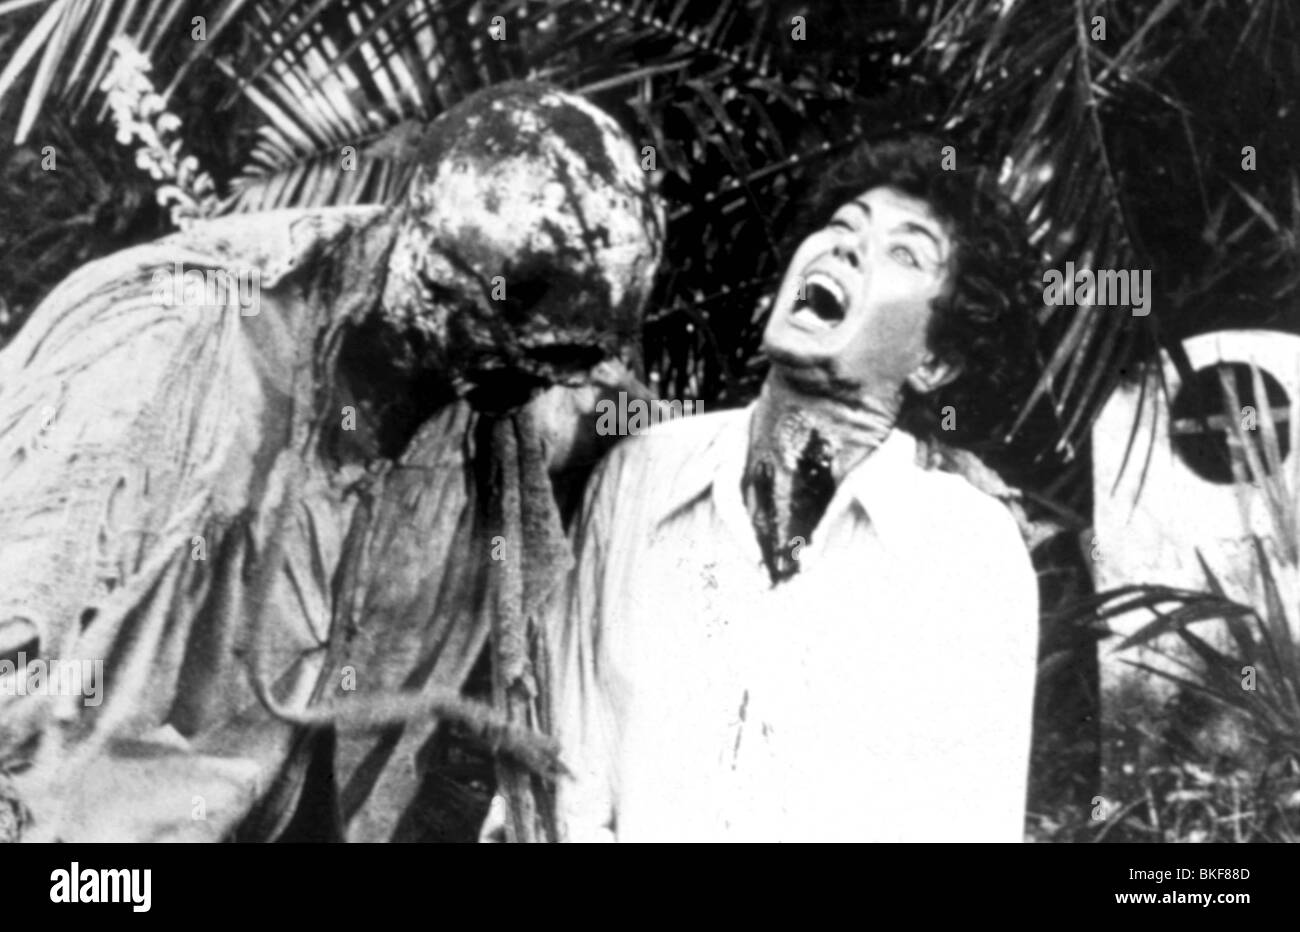 ZOMBIE 2: THE DEAD ARE AMONG US (1979) ZOMBIE FLESH-EATERS (ALT) ZOMB 001 Stock Photo